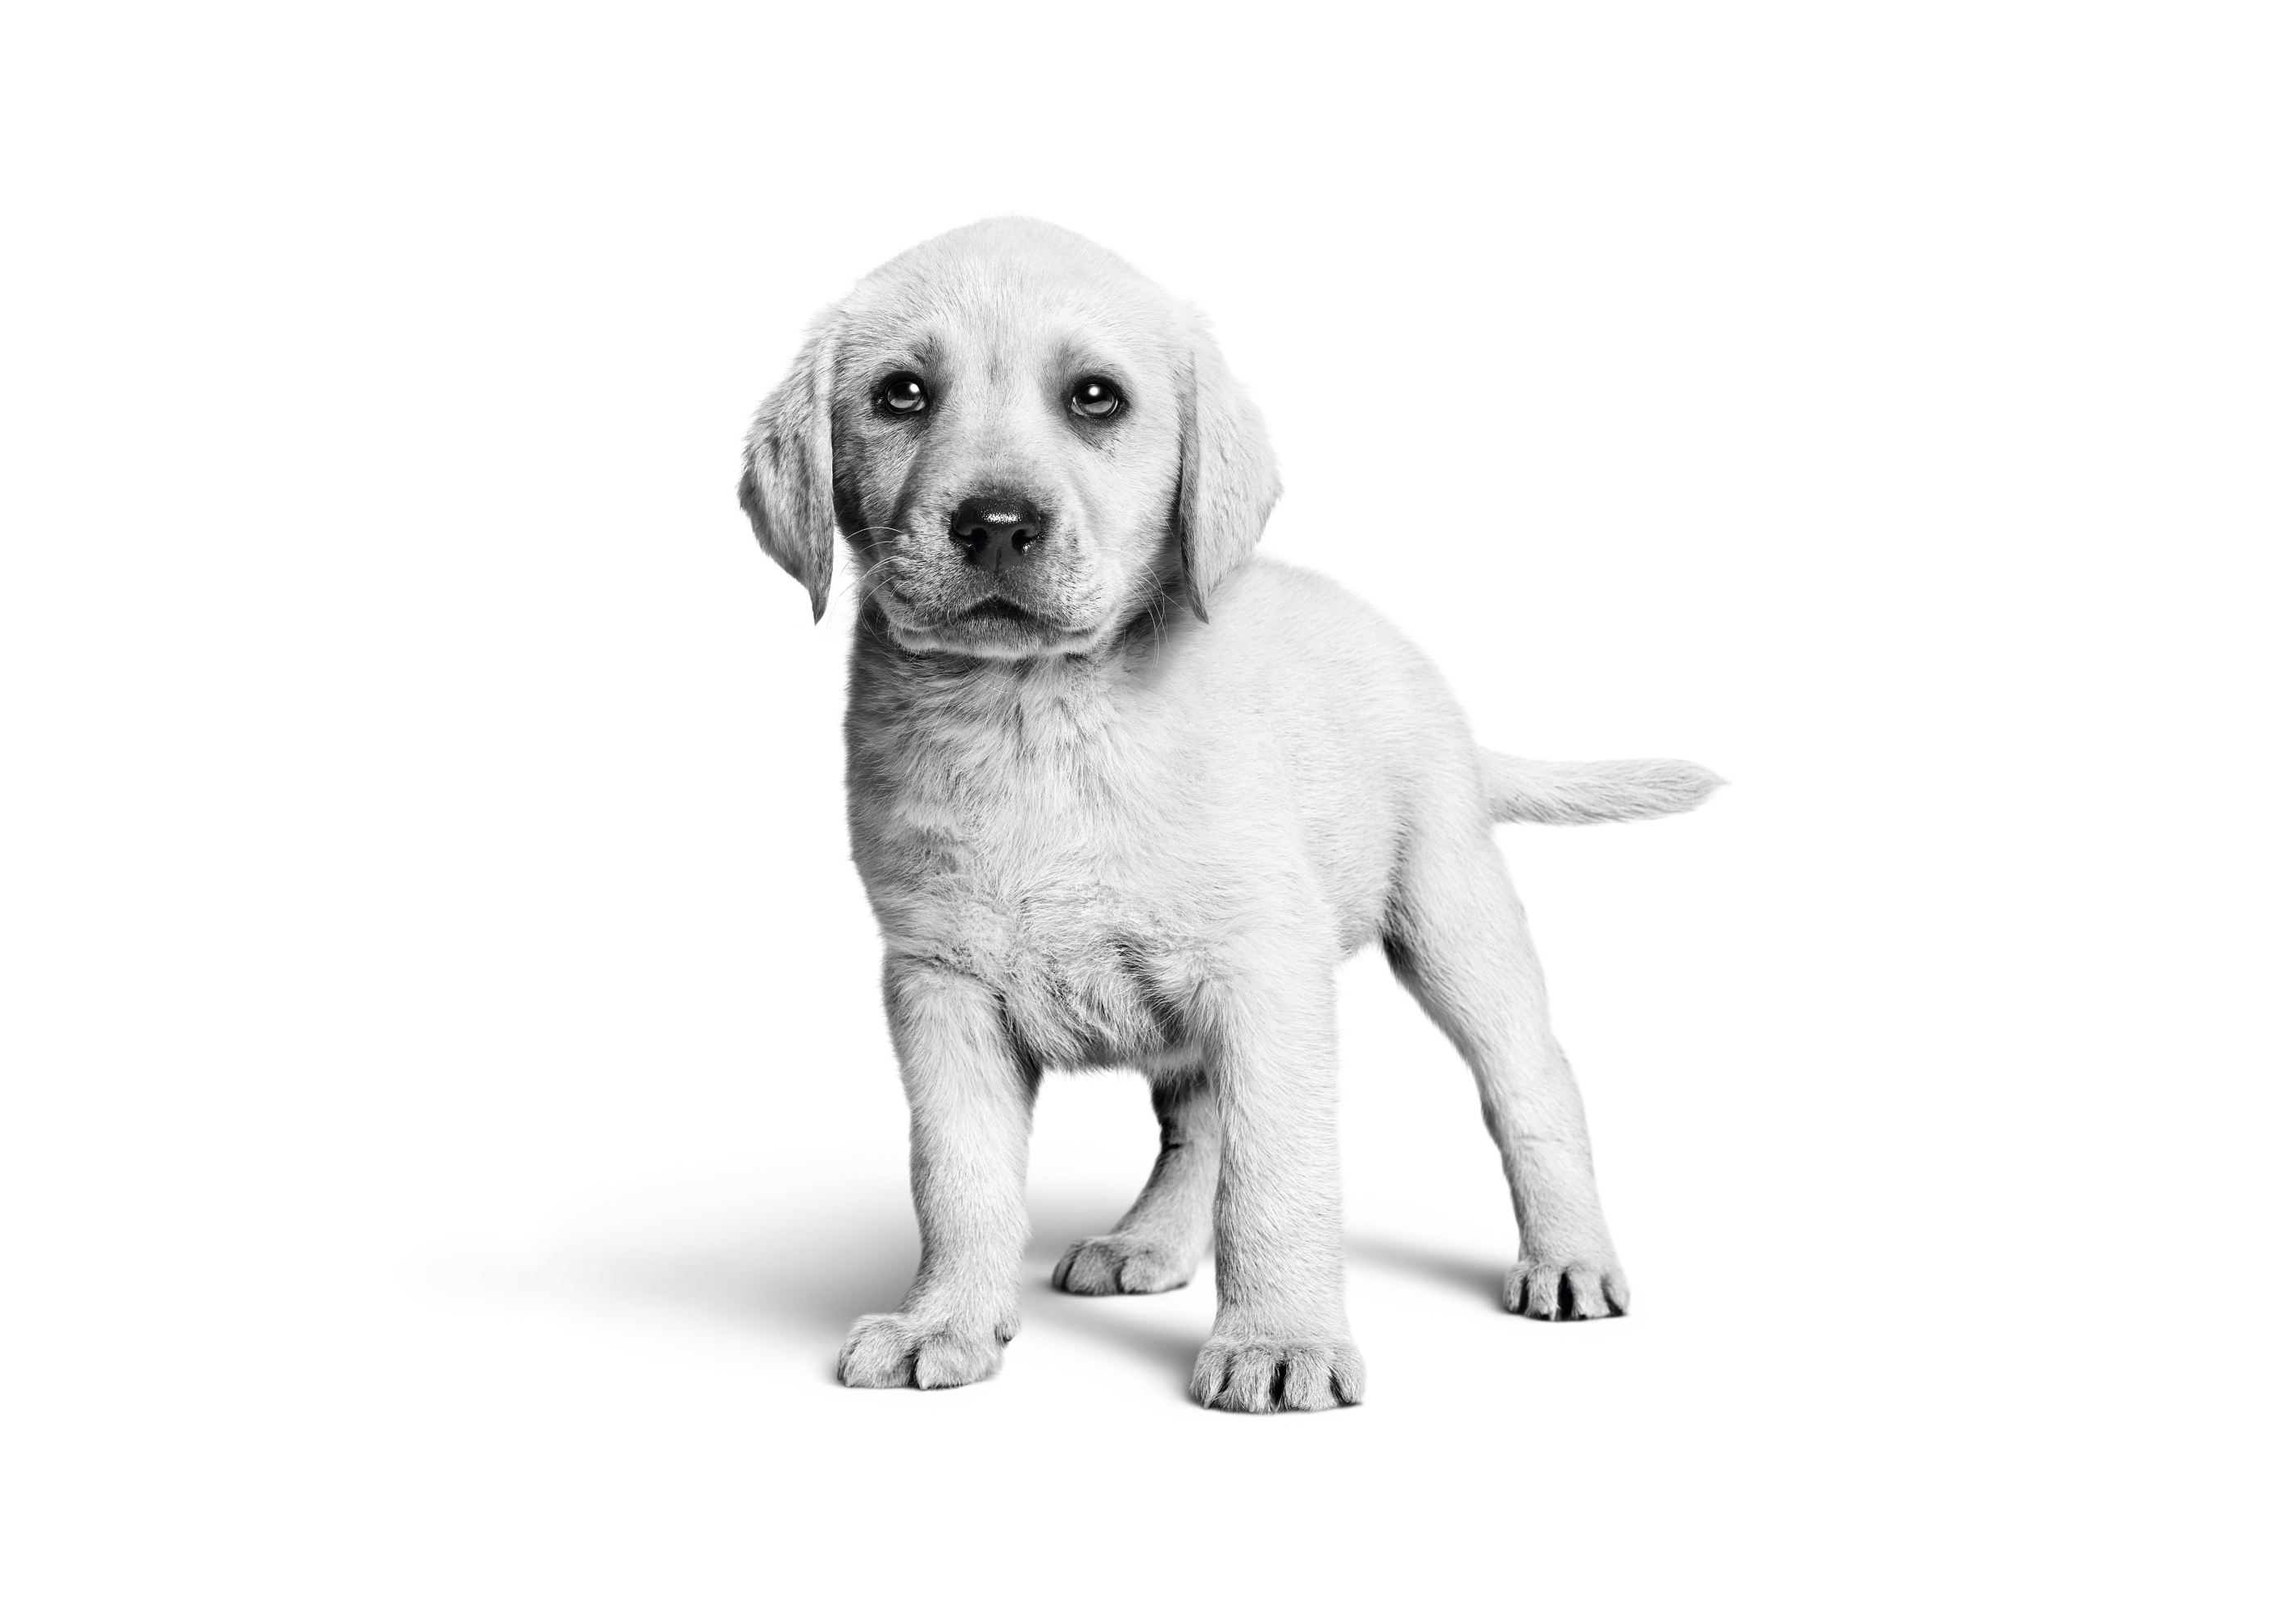 Labrador puppy standing black and white